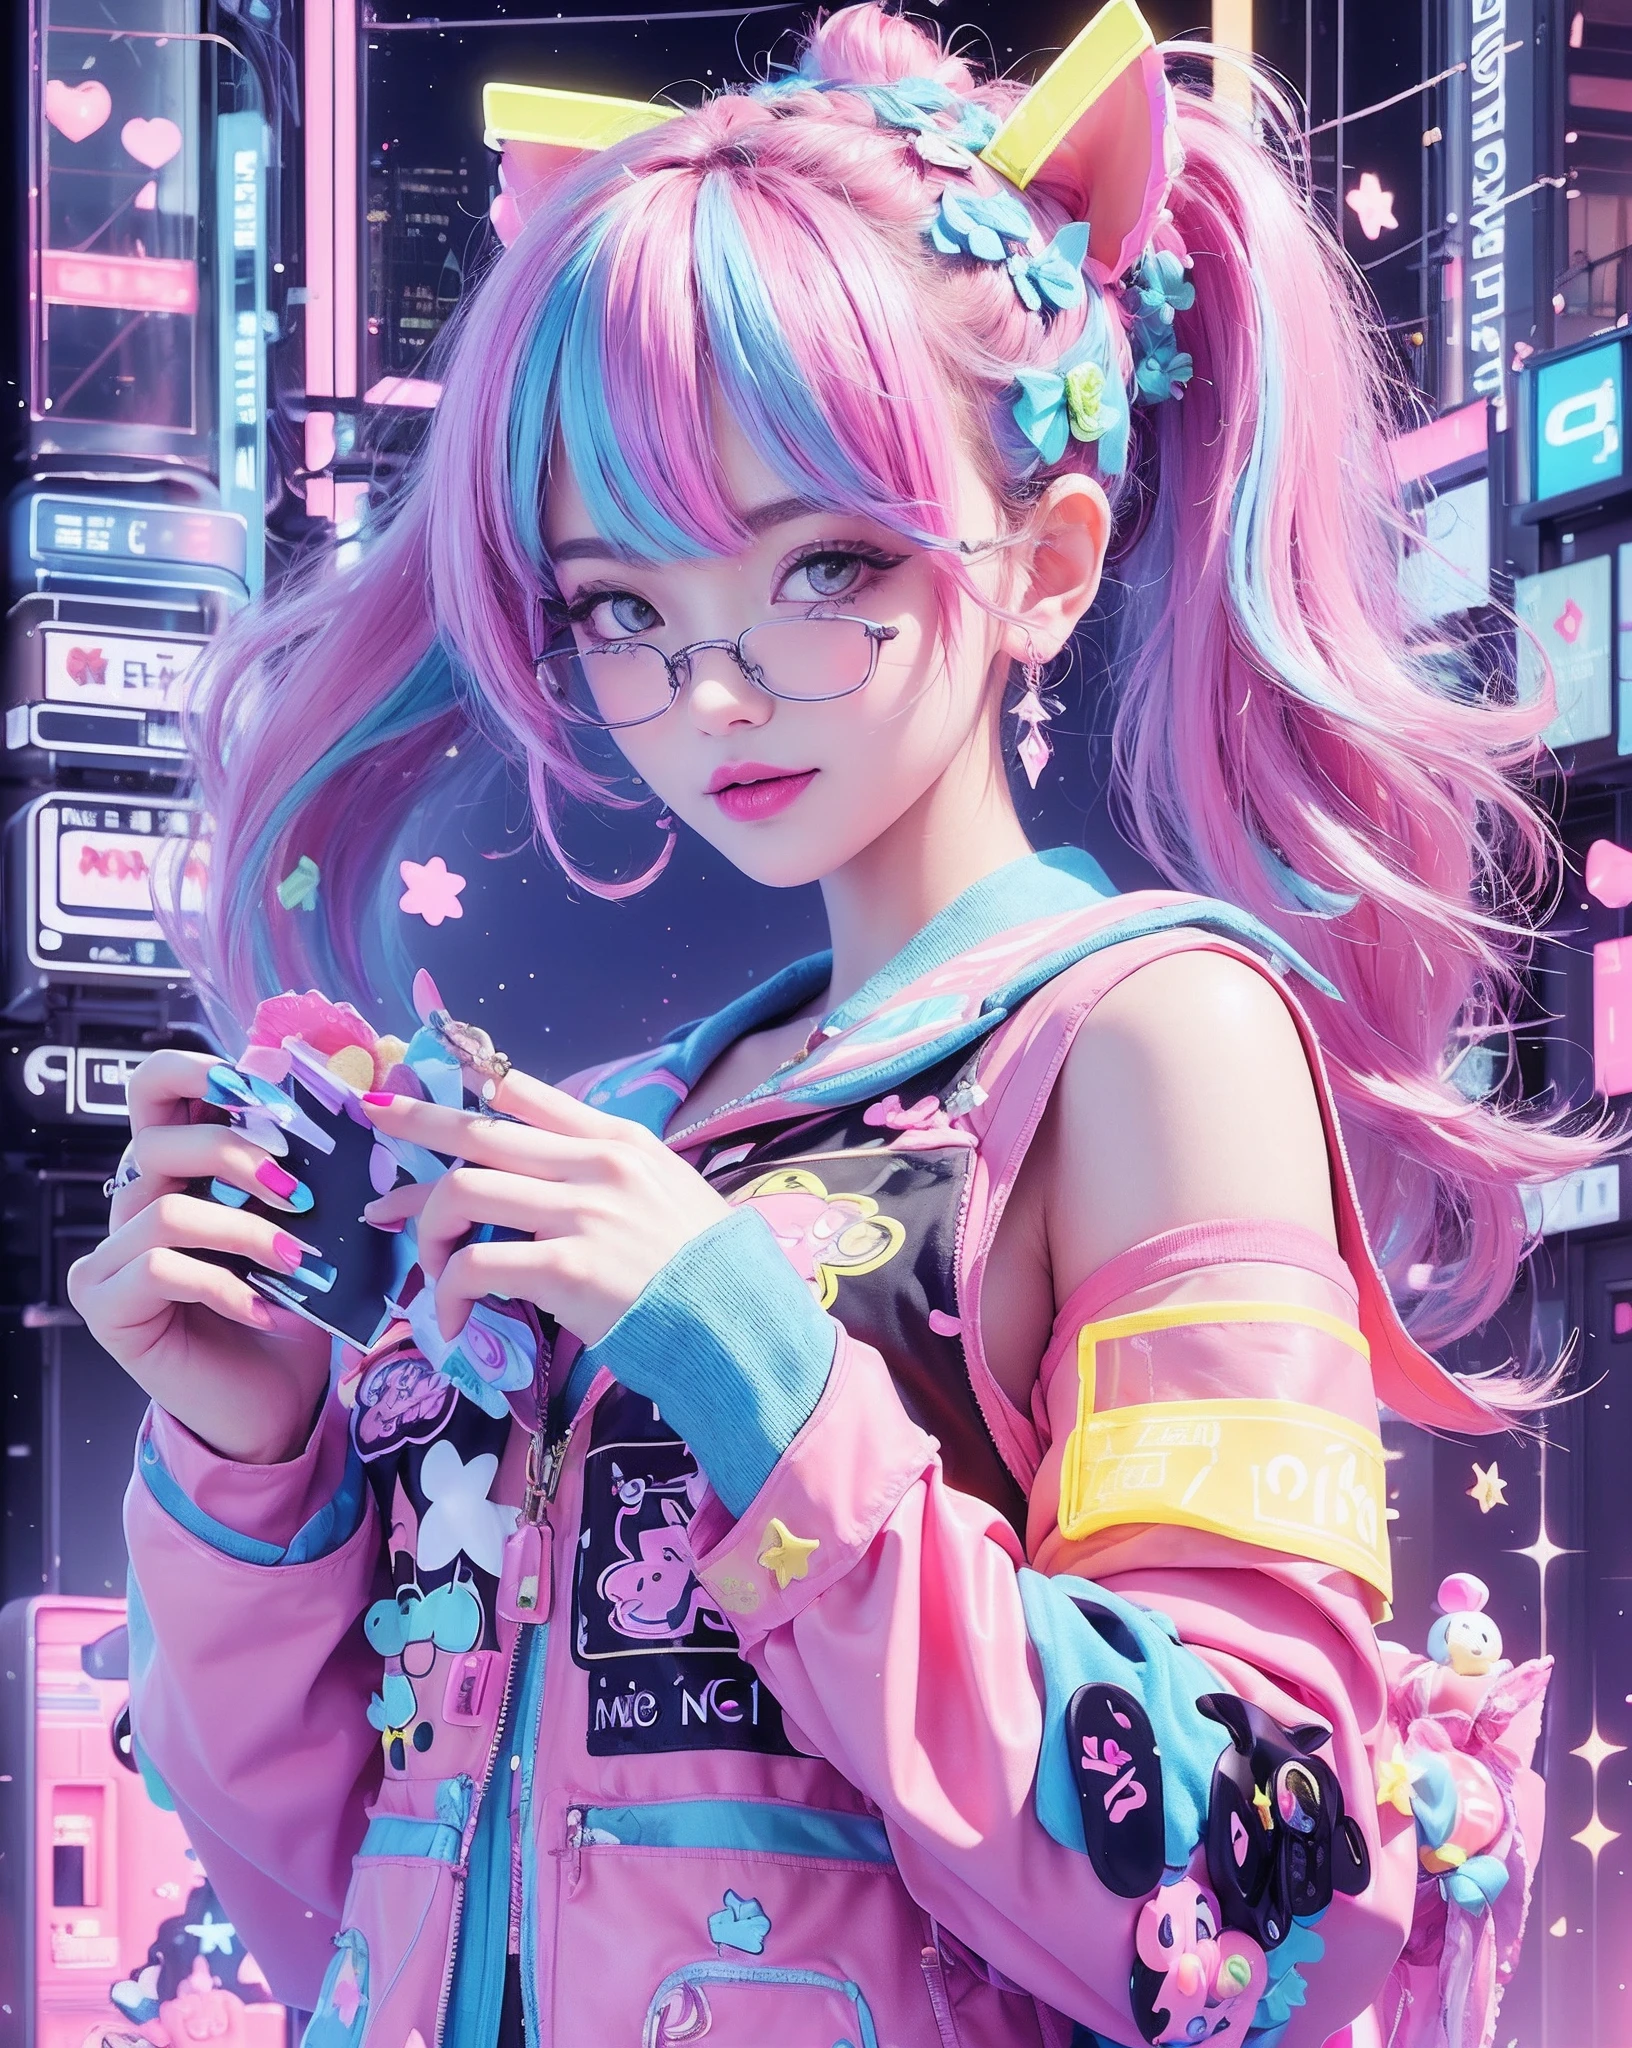 (masterpiece, top quality, best quality, official art, beautiful and aesthetic:1.2), (photoreal:1.5), BREAK 1 girl with a bunch of candy and a candy machine in her hand and a pink background with stars, upper body,smiling break Alice Prin, photo, a detailed painting, pop surrealism, (neon color hair:1.5),strong wind,giant marshmallow candy machine break needlework, intricate designs, textile art, handmade details, creative expression, colorful threads, cyberpunk, neo-dada BREAK